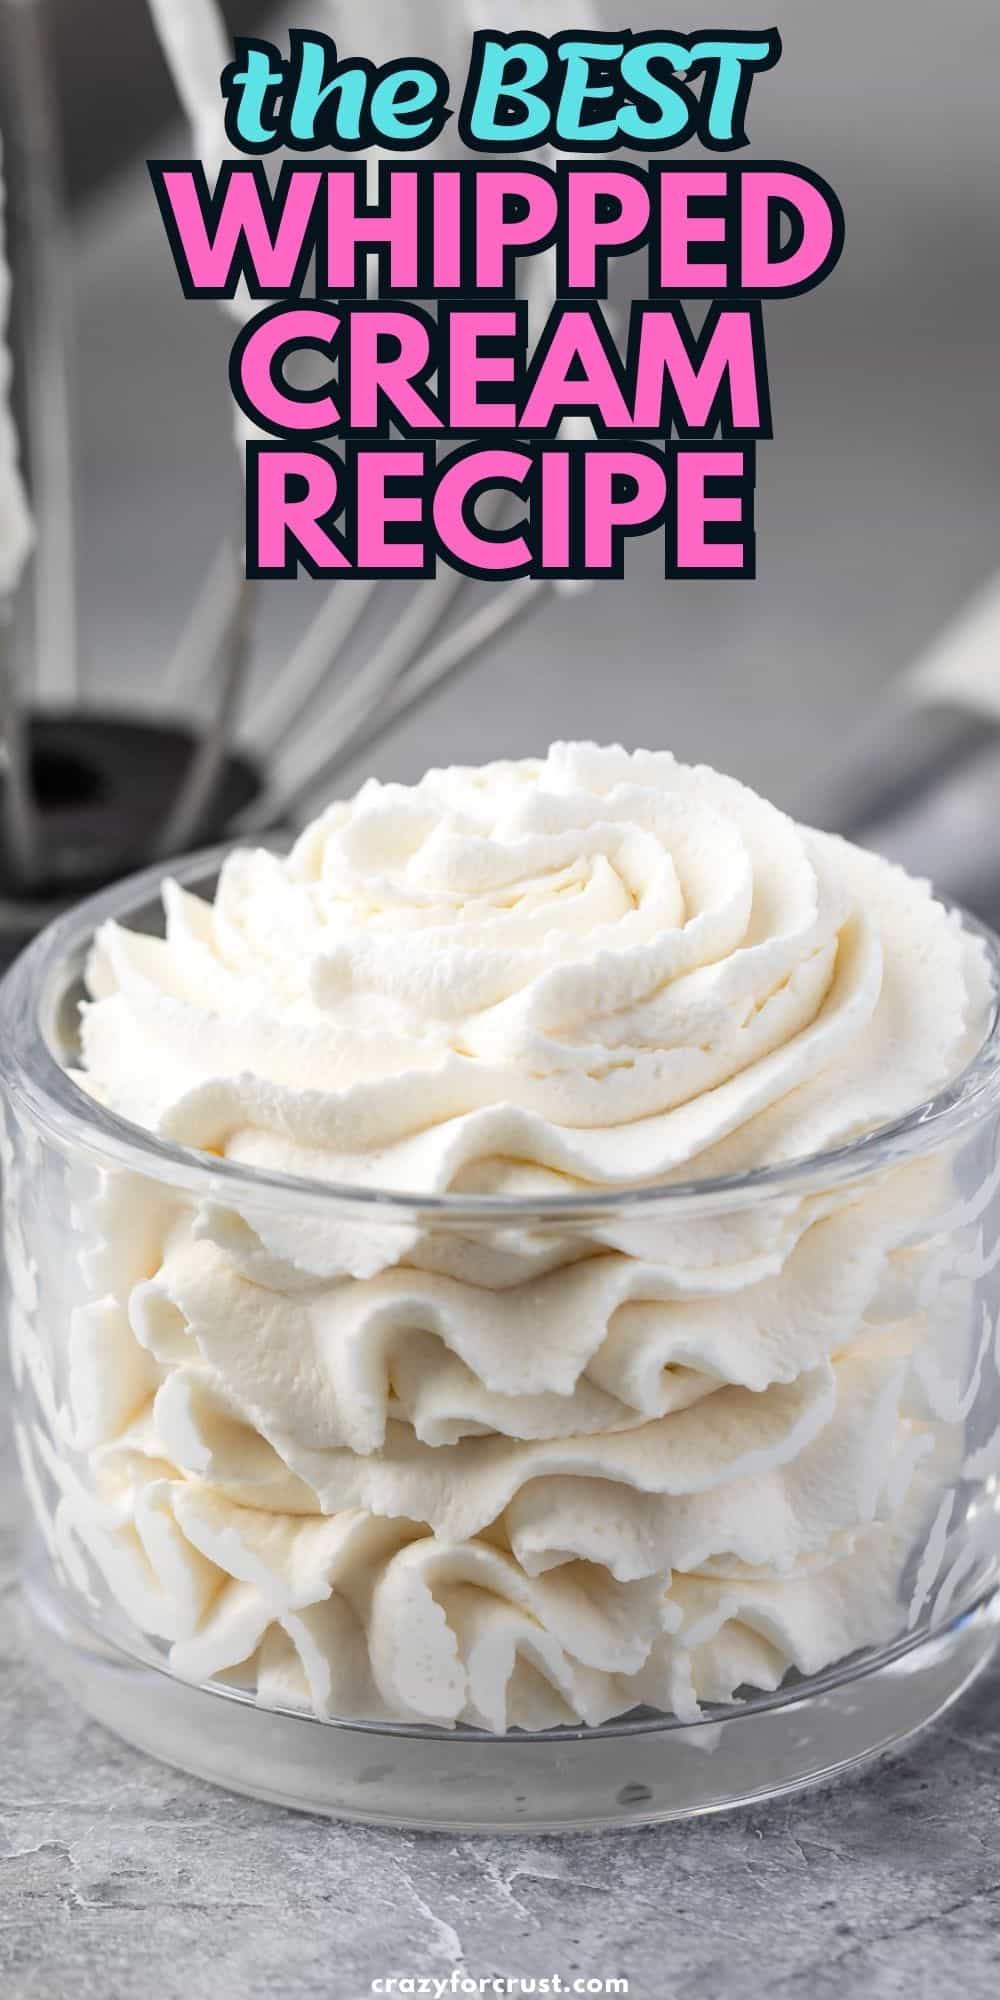 whipped cream in glass bowl with words on photo.